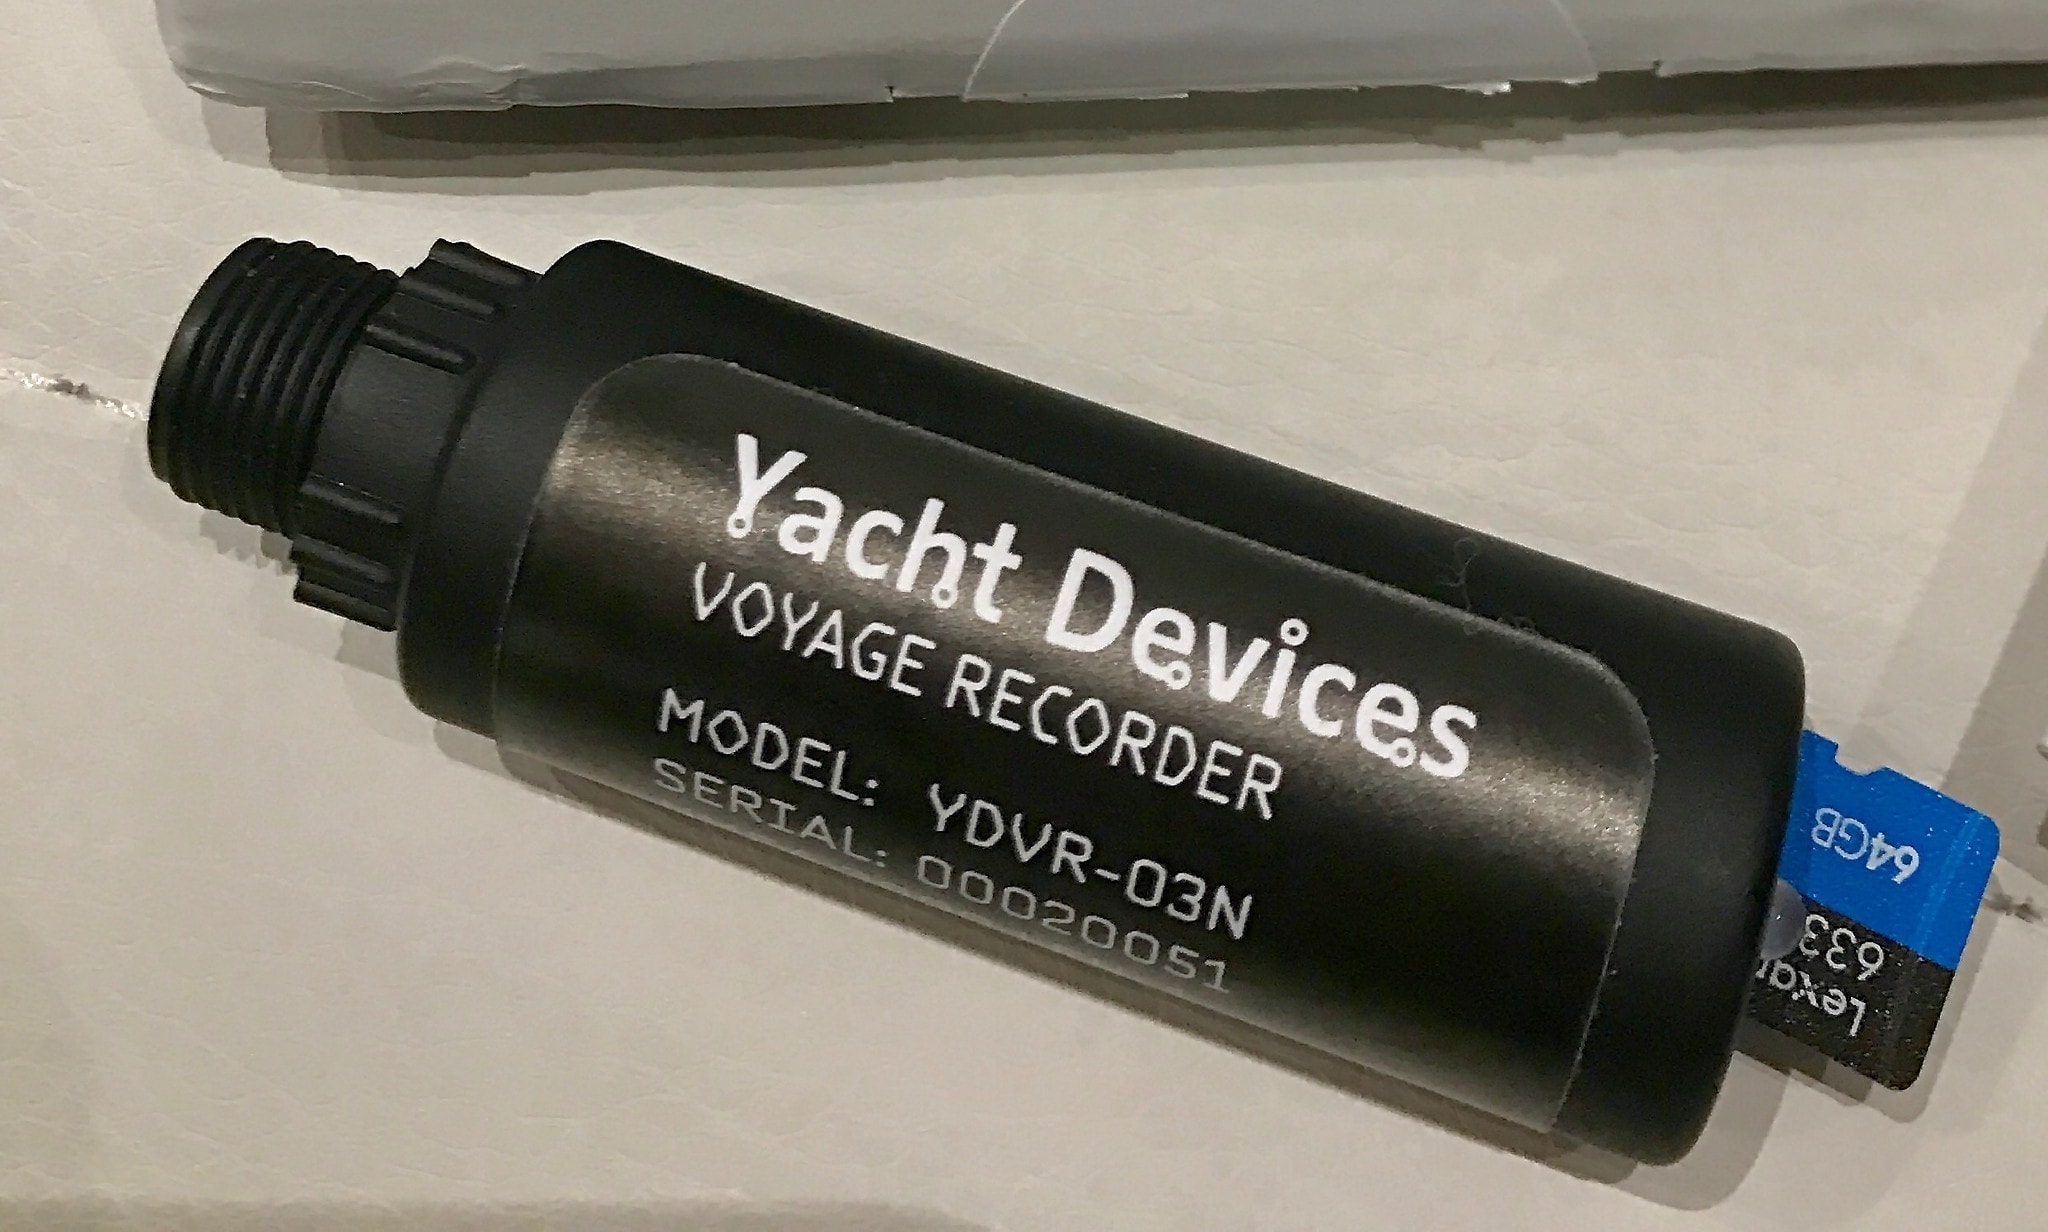 Yacht Devices Voyage Recorder - a black box for your boat